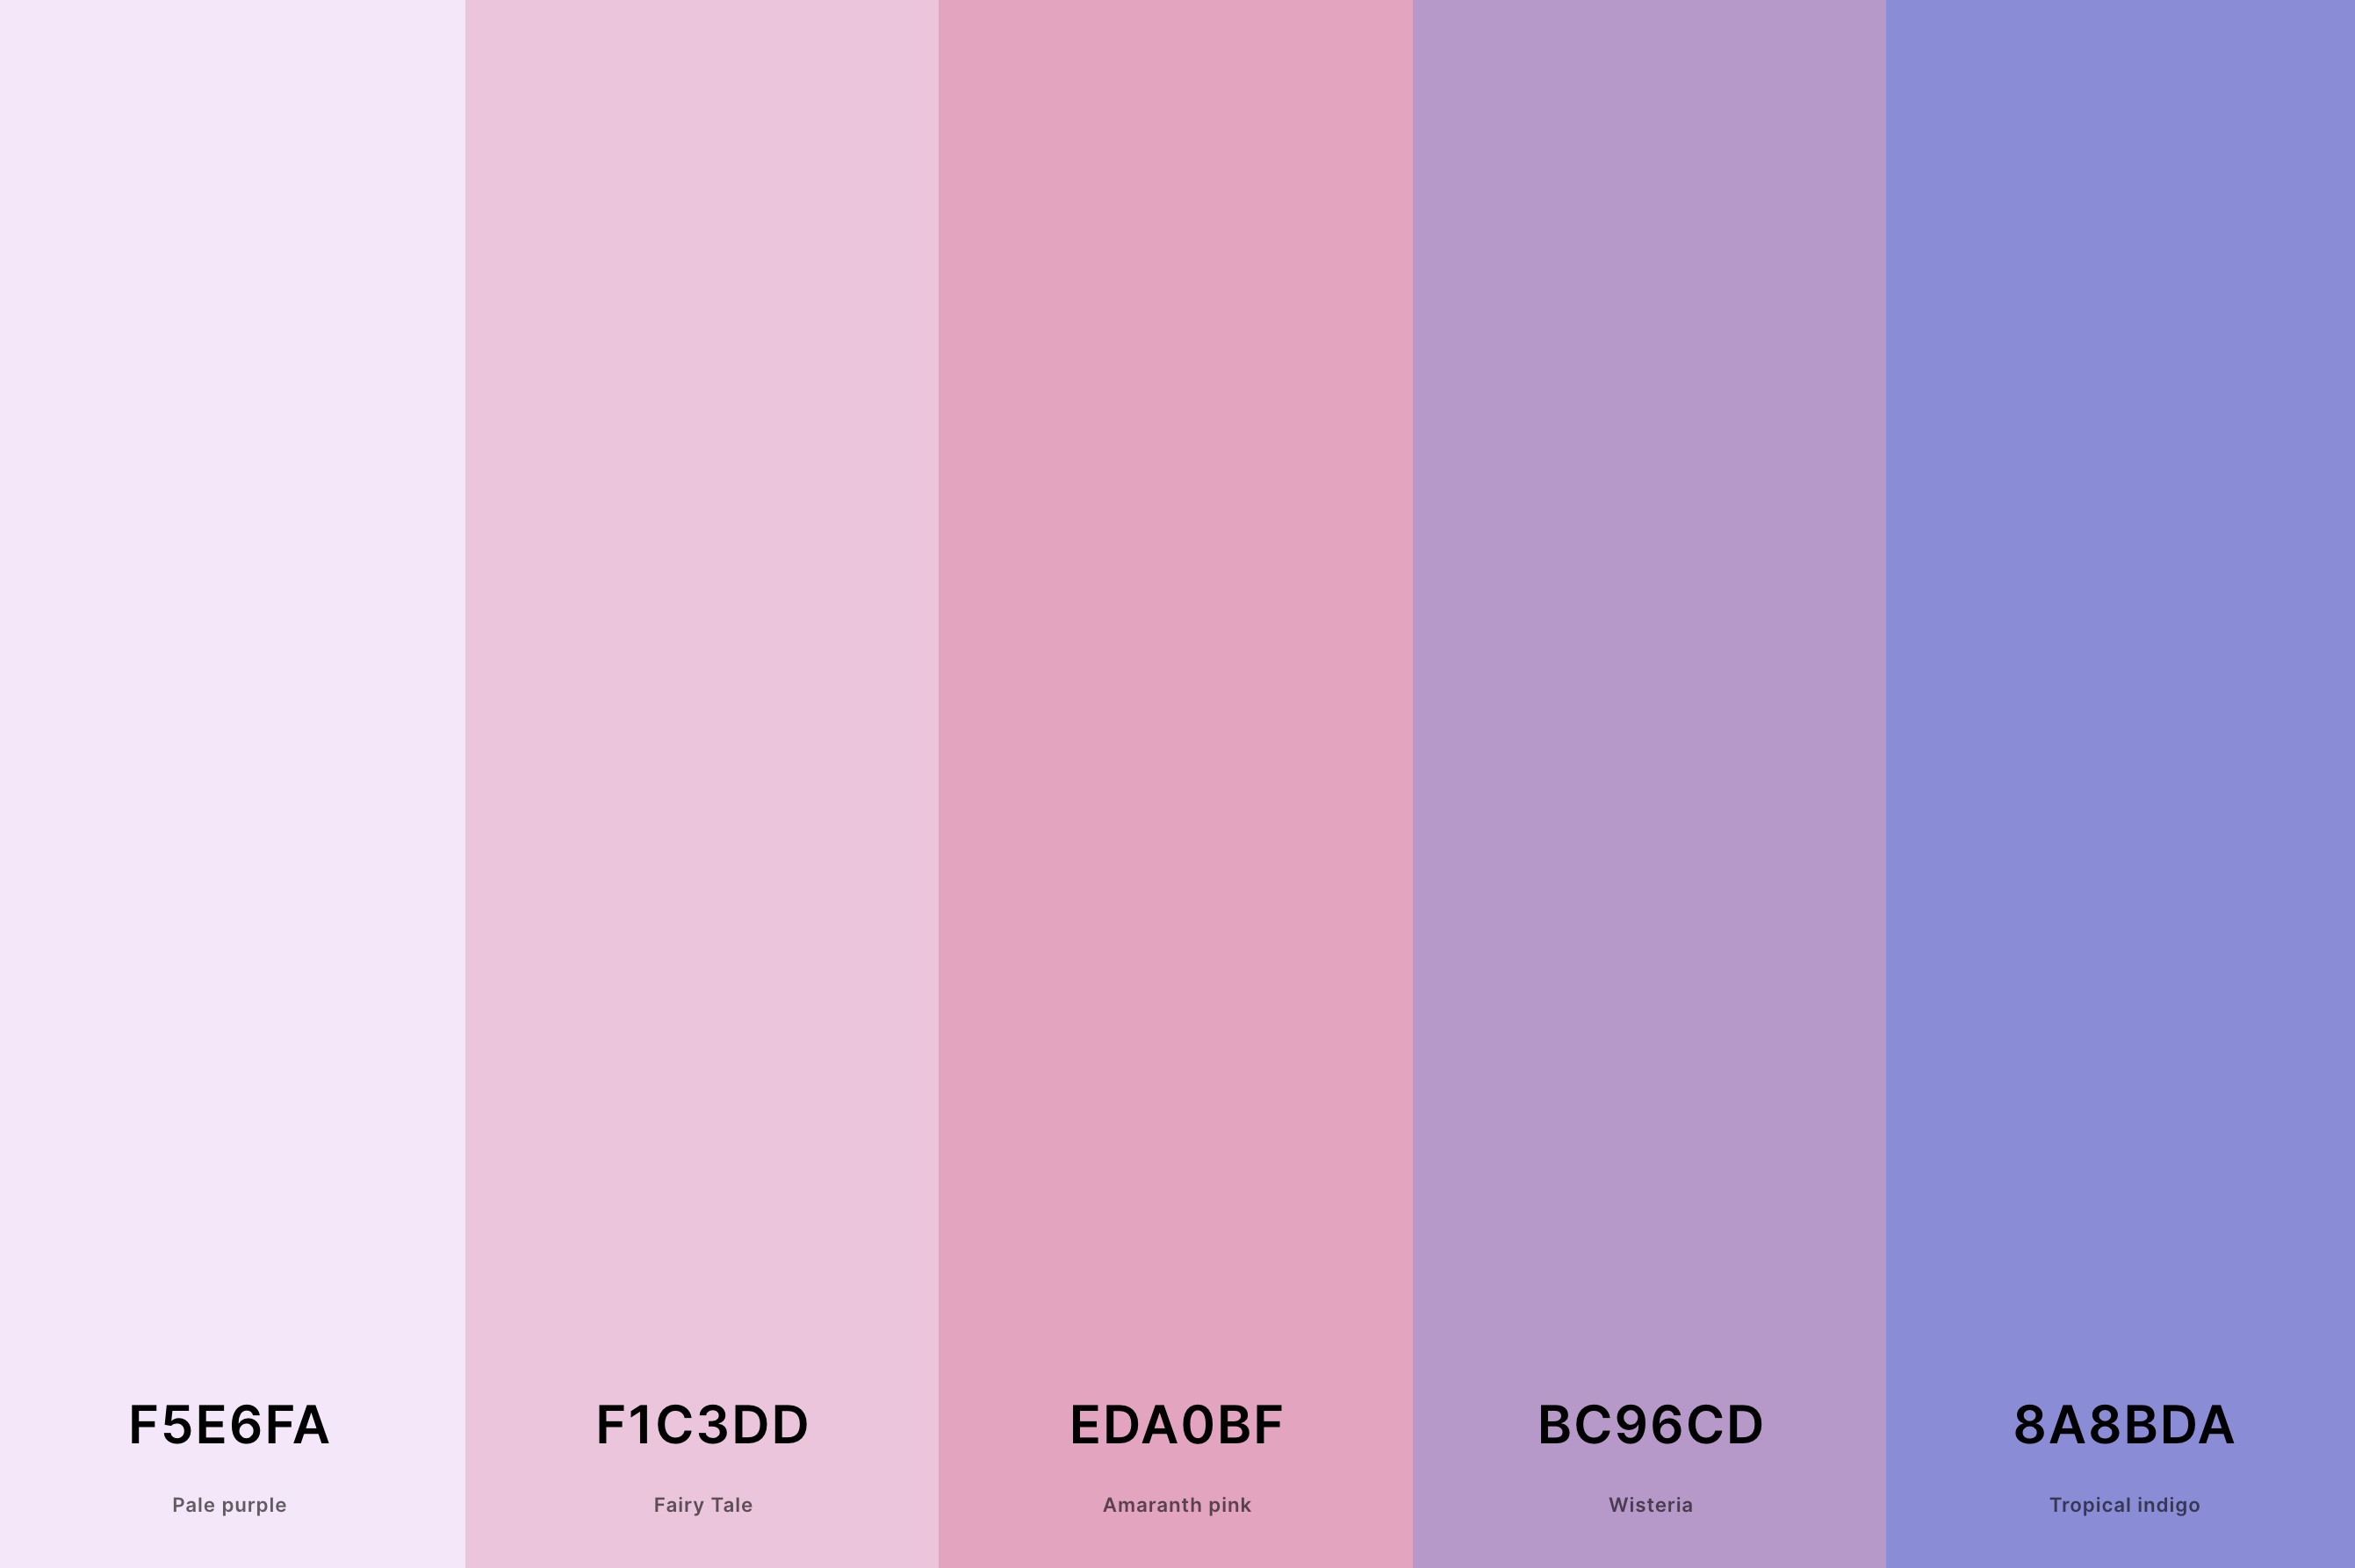 23. Pink And Lavender Color Palette Color Palette with Pale Purple (Hex #F5E6FA) + Fairy Tale (Hex #F1C3DD) + Amaranth Pink (Hex #EDA0BF) + Wisteria (Hex #BC96CD) + Tropical Indigo (Hex #8A8BDA) Color Palette with Hex Codes